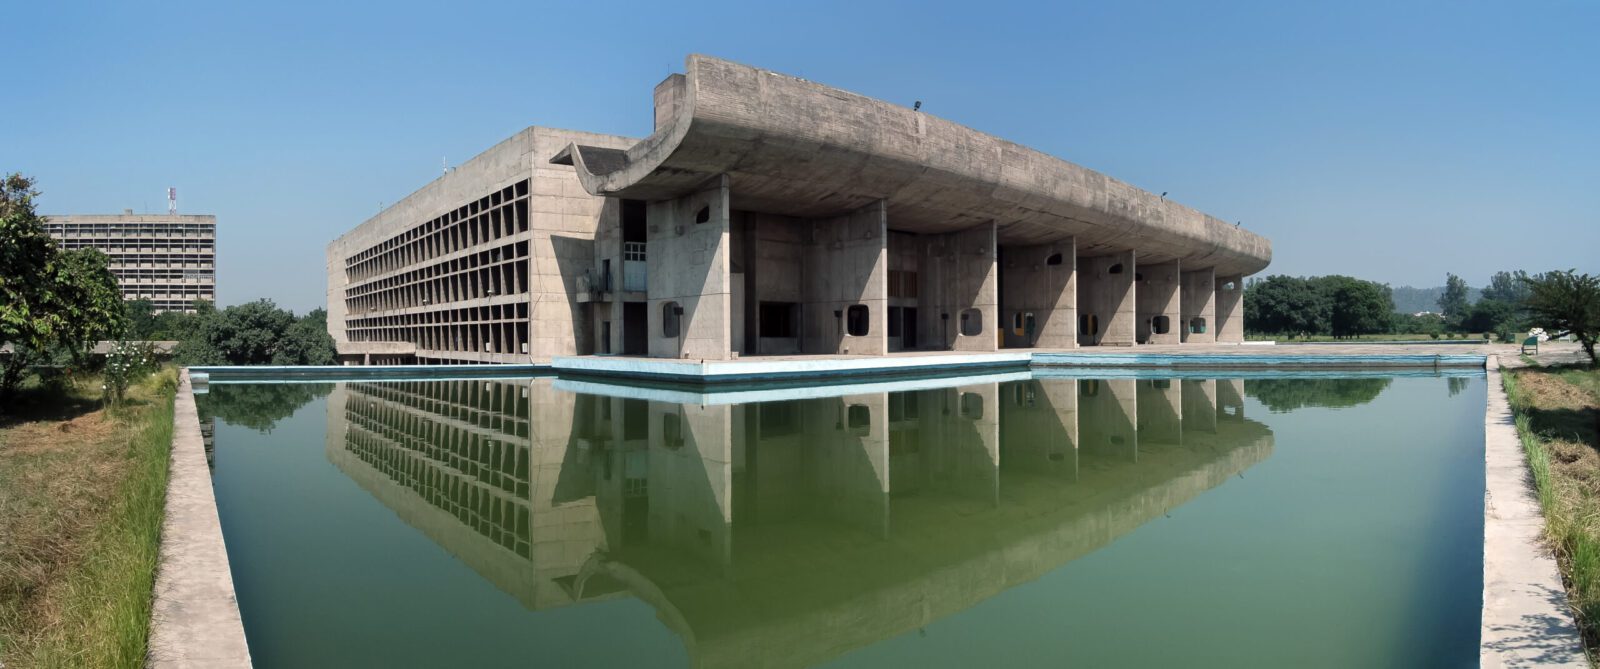 https://www.voyageeninde.org/wp-content/uploads/2023/01/Palace_of_Assembly_Chandigarh-1-scaled.jpg